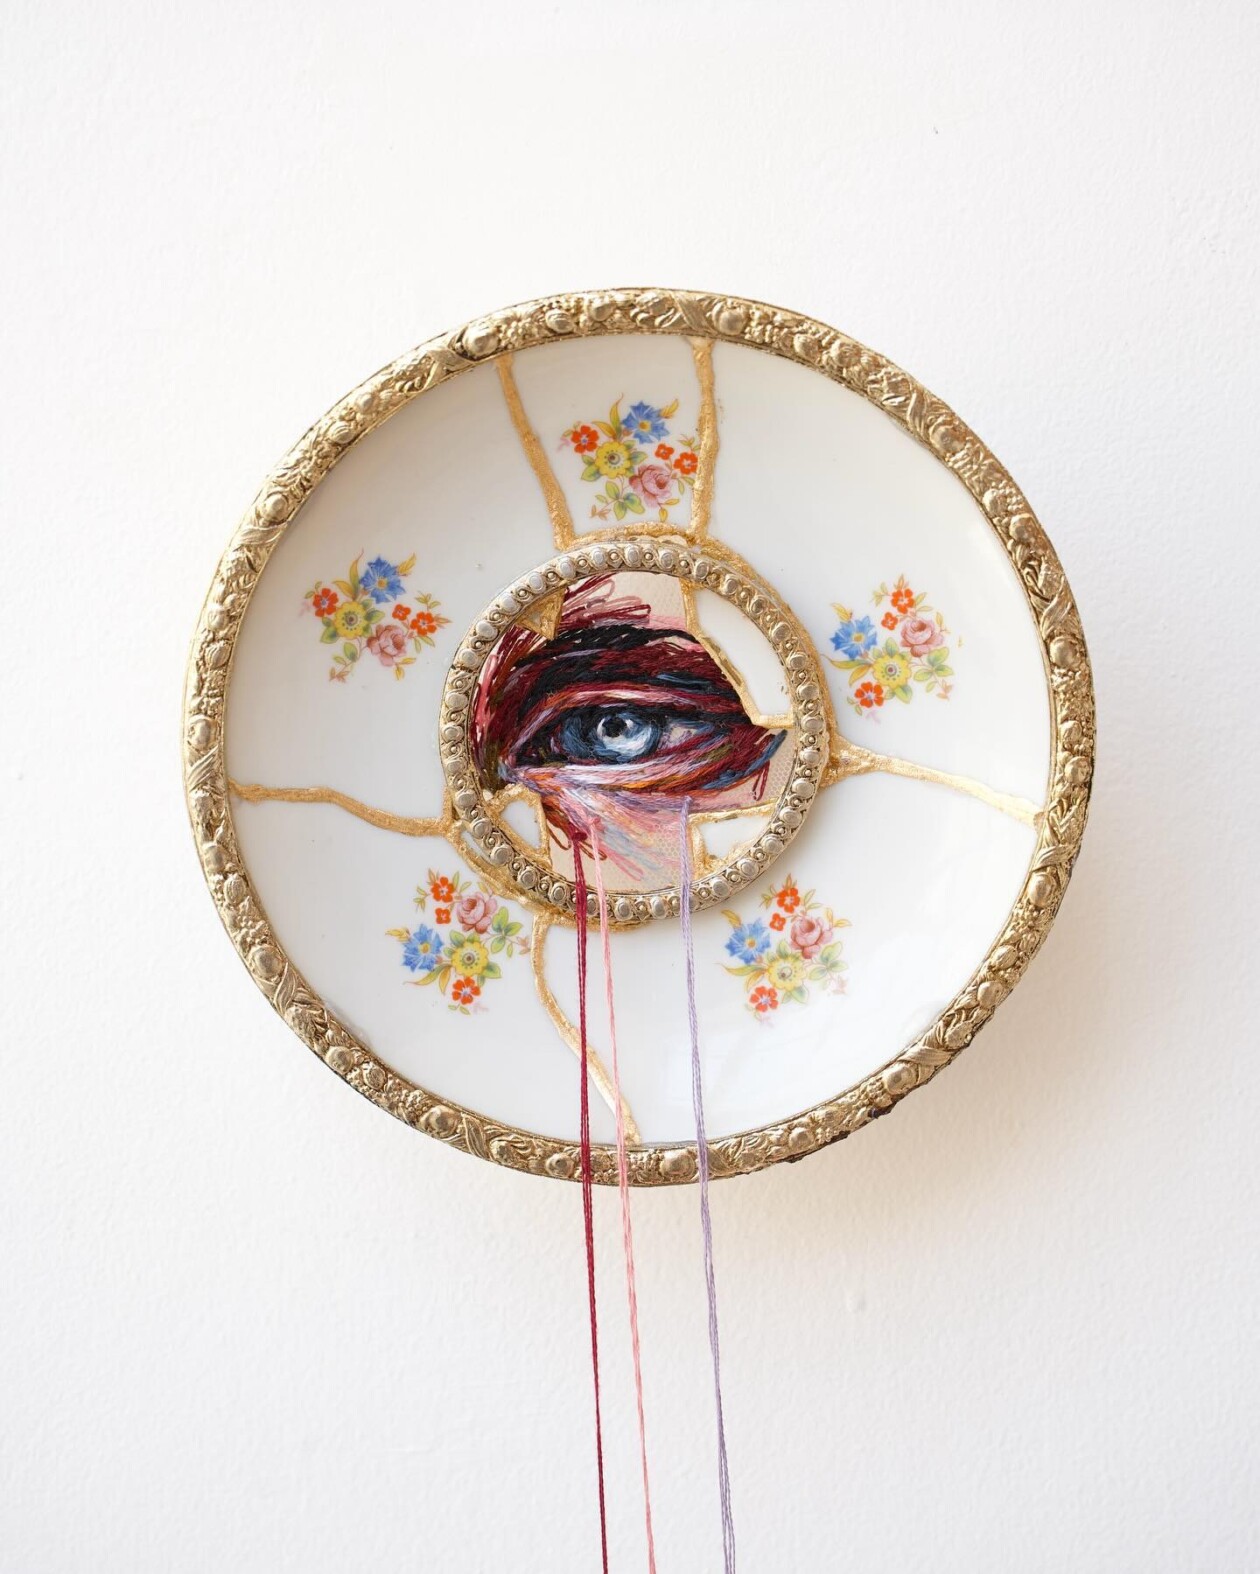 Embroidered Kintsugi, Delicate And Meaningful Mixed Media Artworks By Kathrin Marchenko (1)